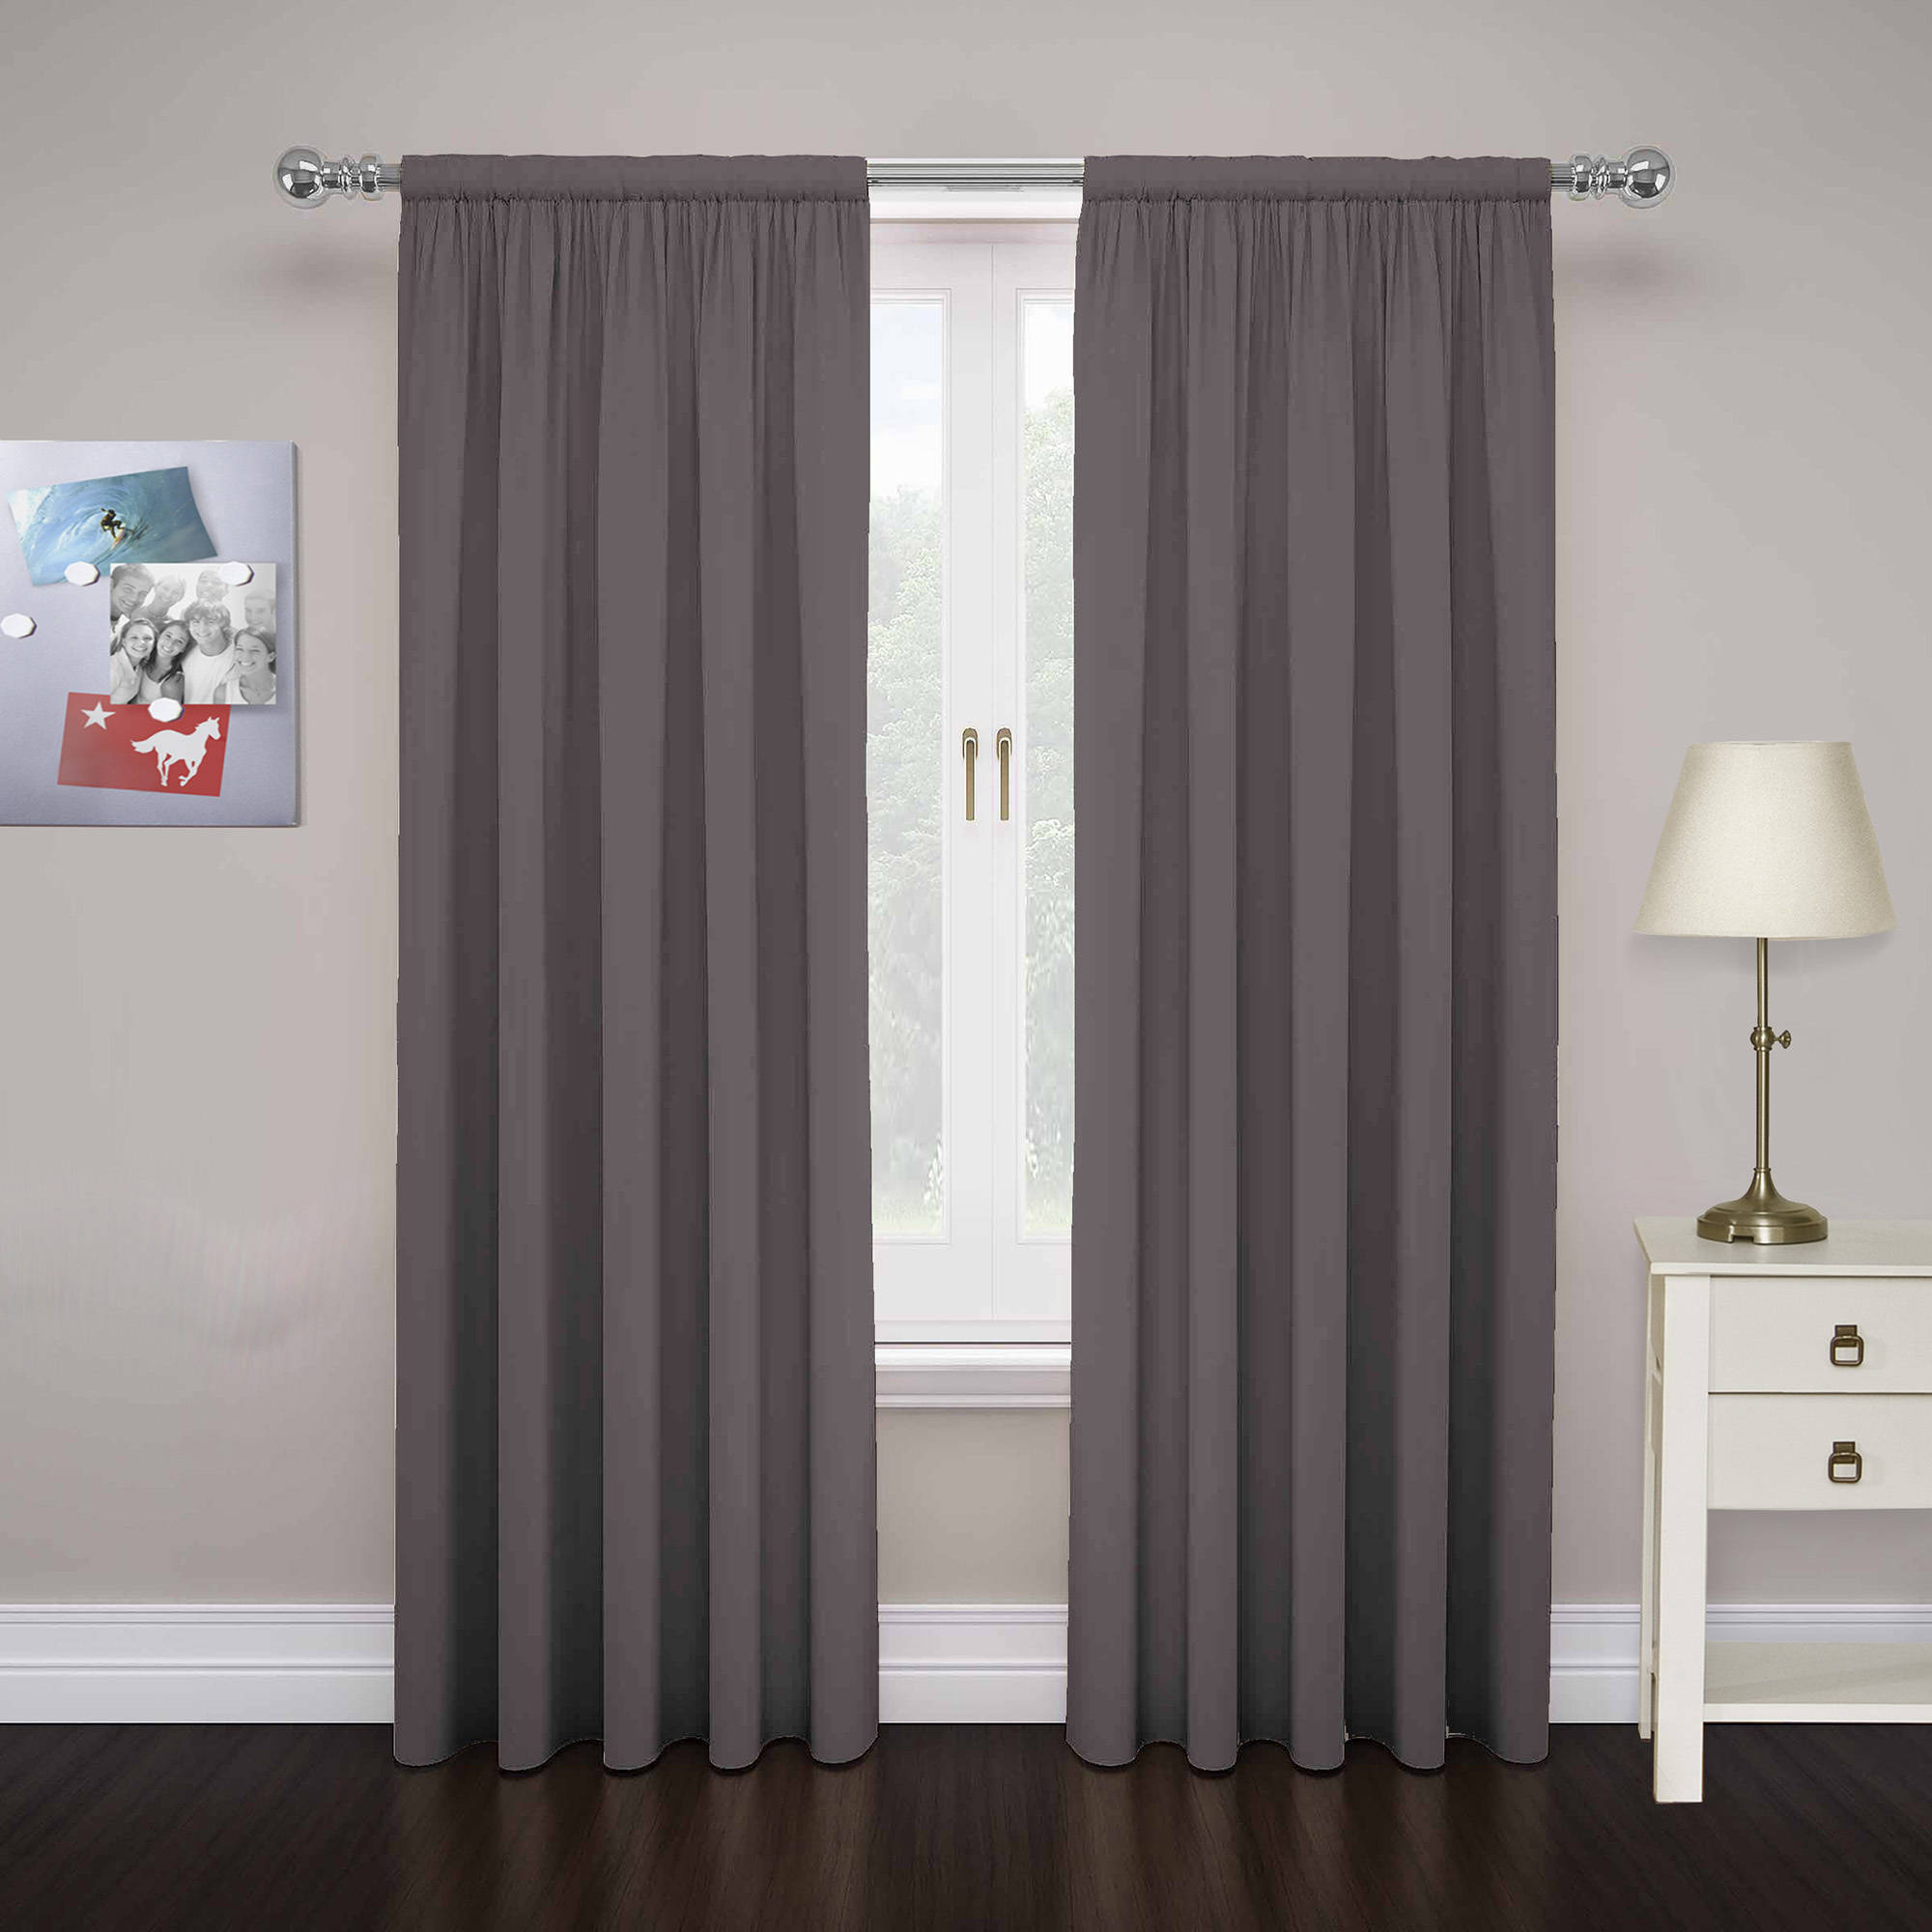 Cadenza microfiber curtain 2-pack for $6.36 with store pickup